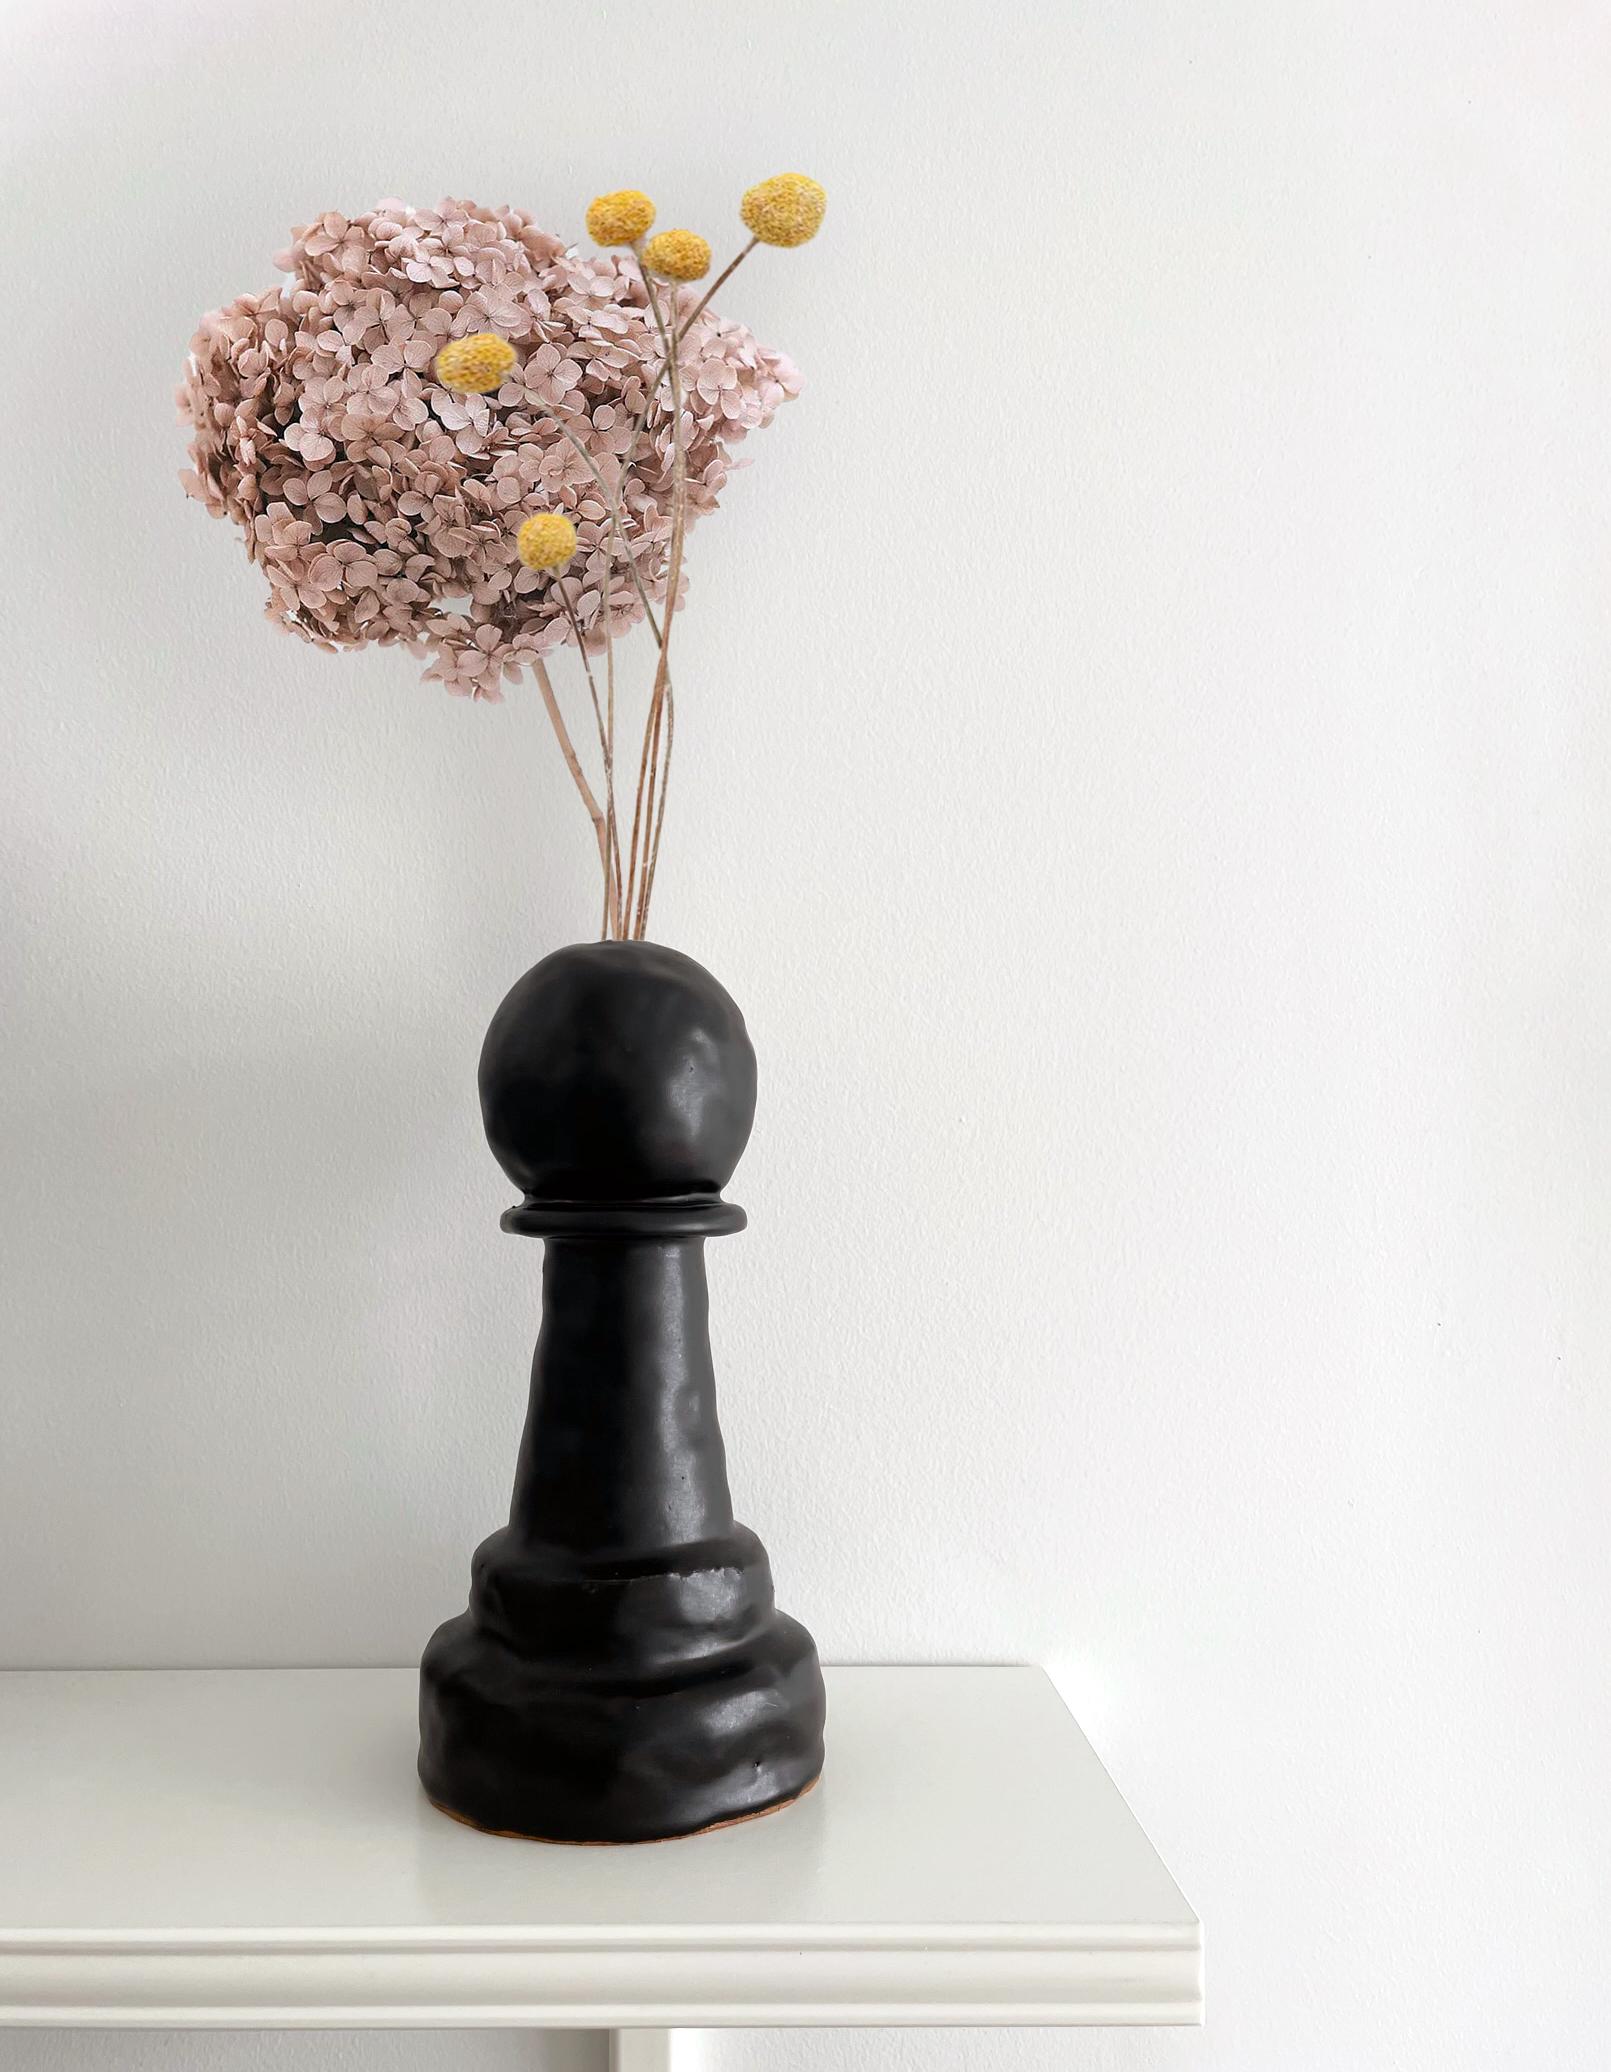 This is a one of a kind piece handcrafted in Brooklyn, NY by ceramicist and interior designer Catie Curry. The above listed piece is available for immediate purchase, but other chess pieces can be recreated upon request. 

This is a part of the